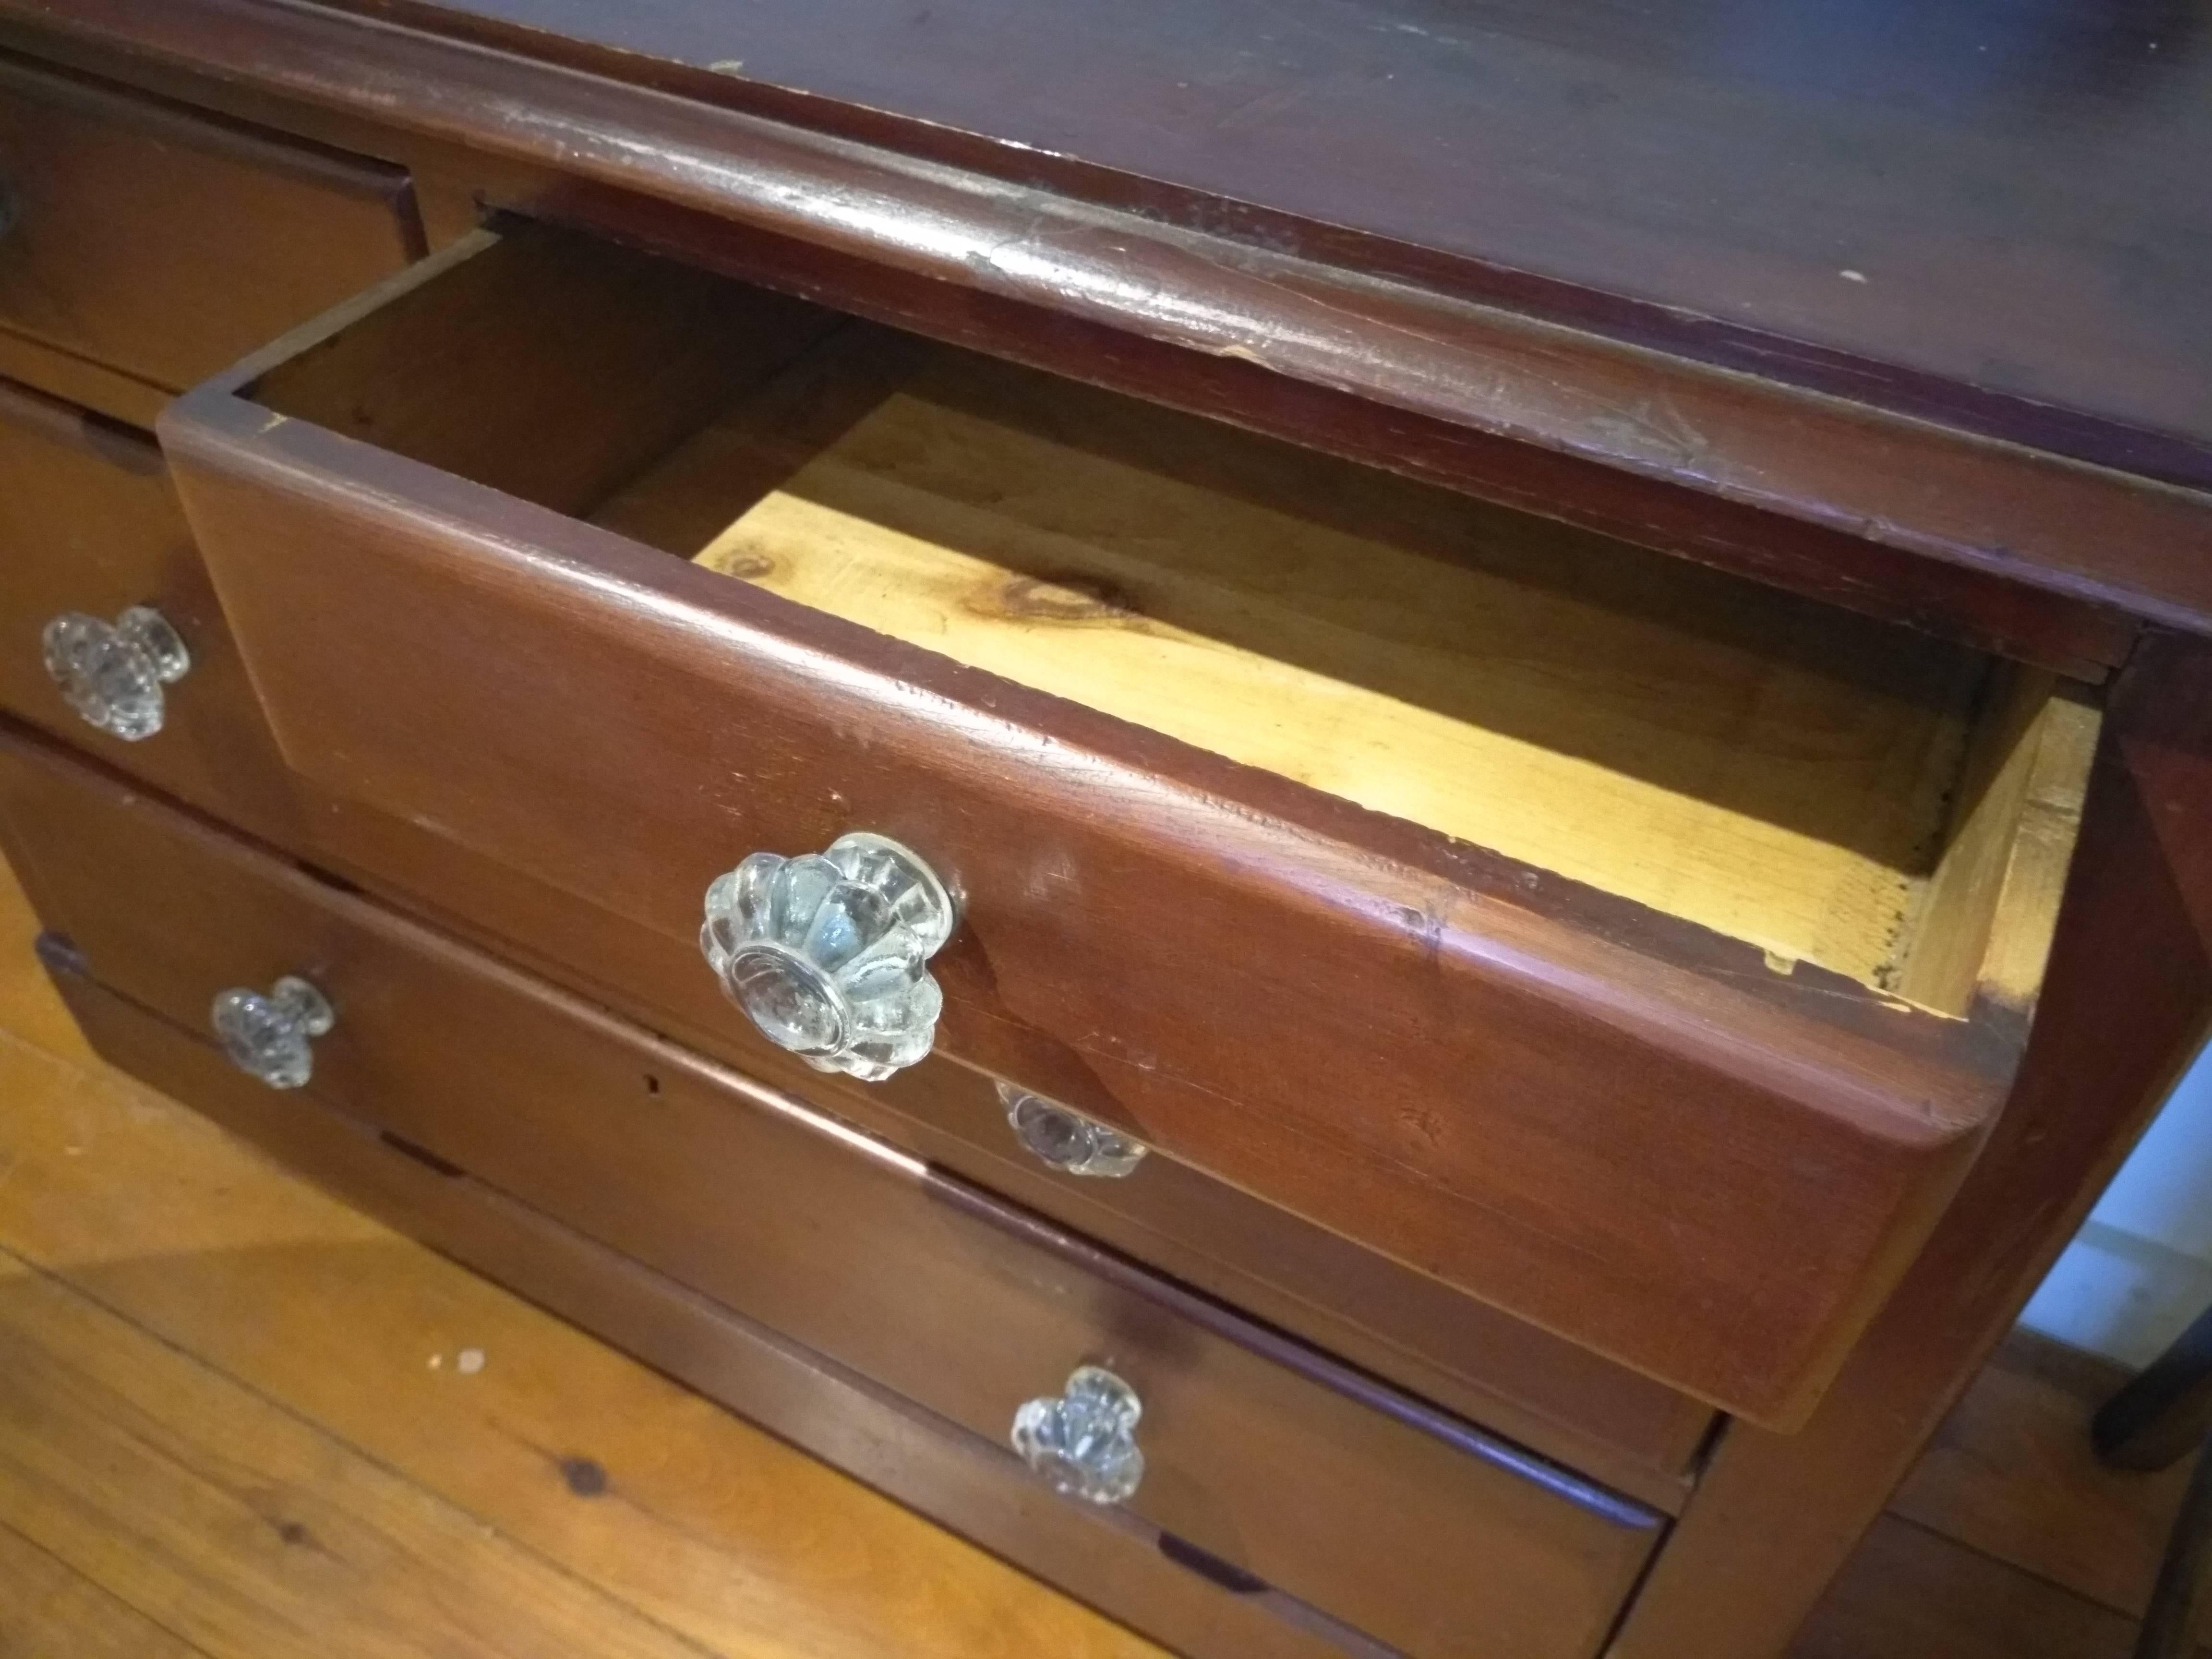 This sweet barn red chest of drawers has its original glass knobs, which makes this piece stand out immediately. Made in England, it dates from 1880 and is made of pine. It is in very nice condition and a small piece which would be perfect for a